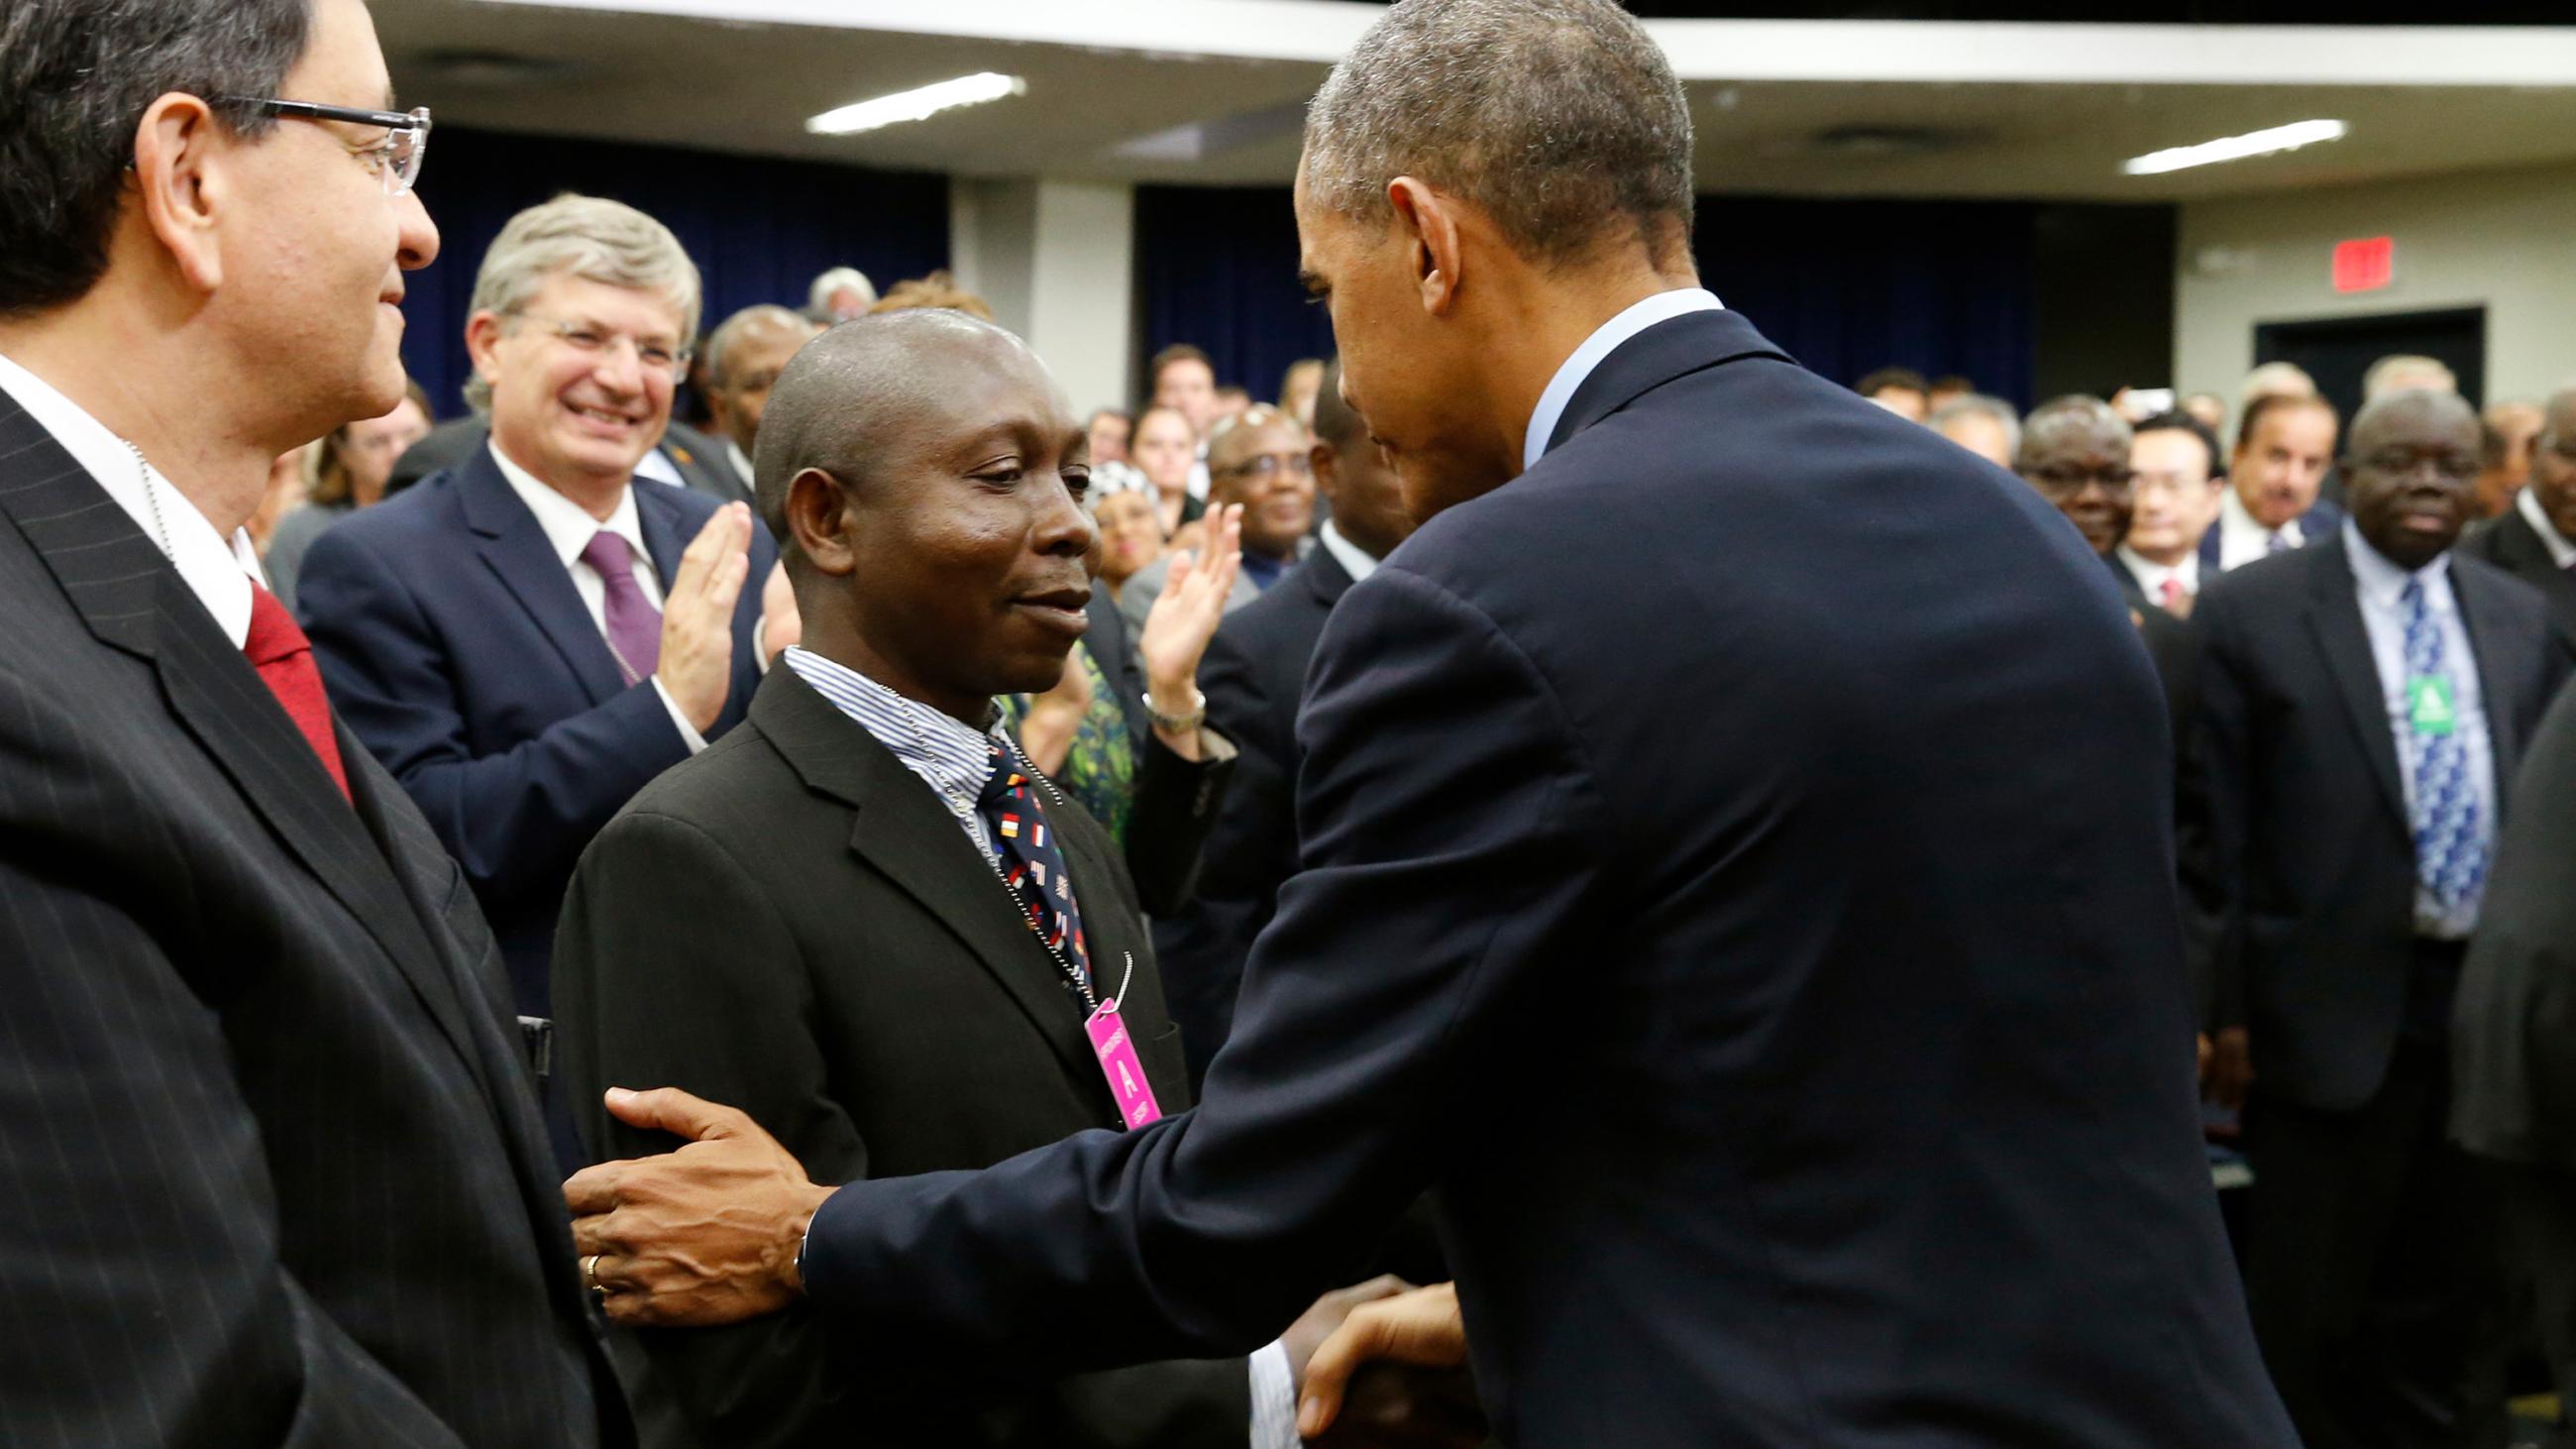 The picture shows the president with his back to the camera shaking hands with a man who is smiling broadly. They are surrounded by other officials and guests. 